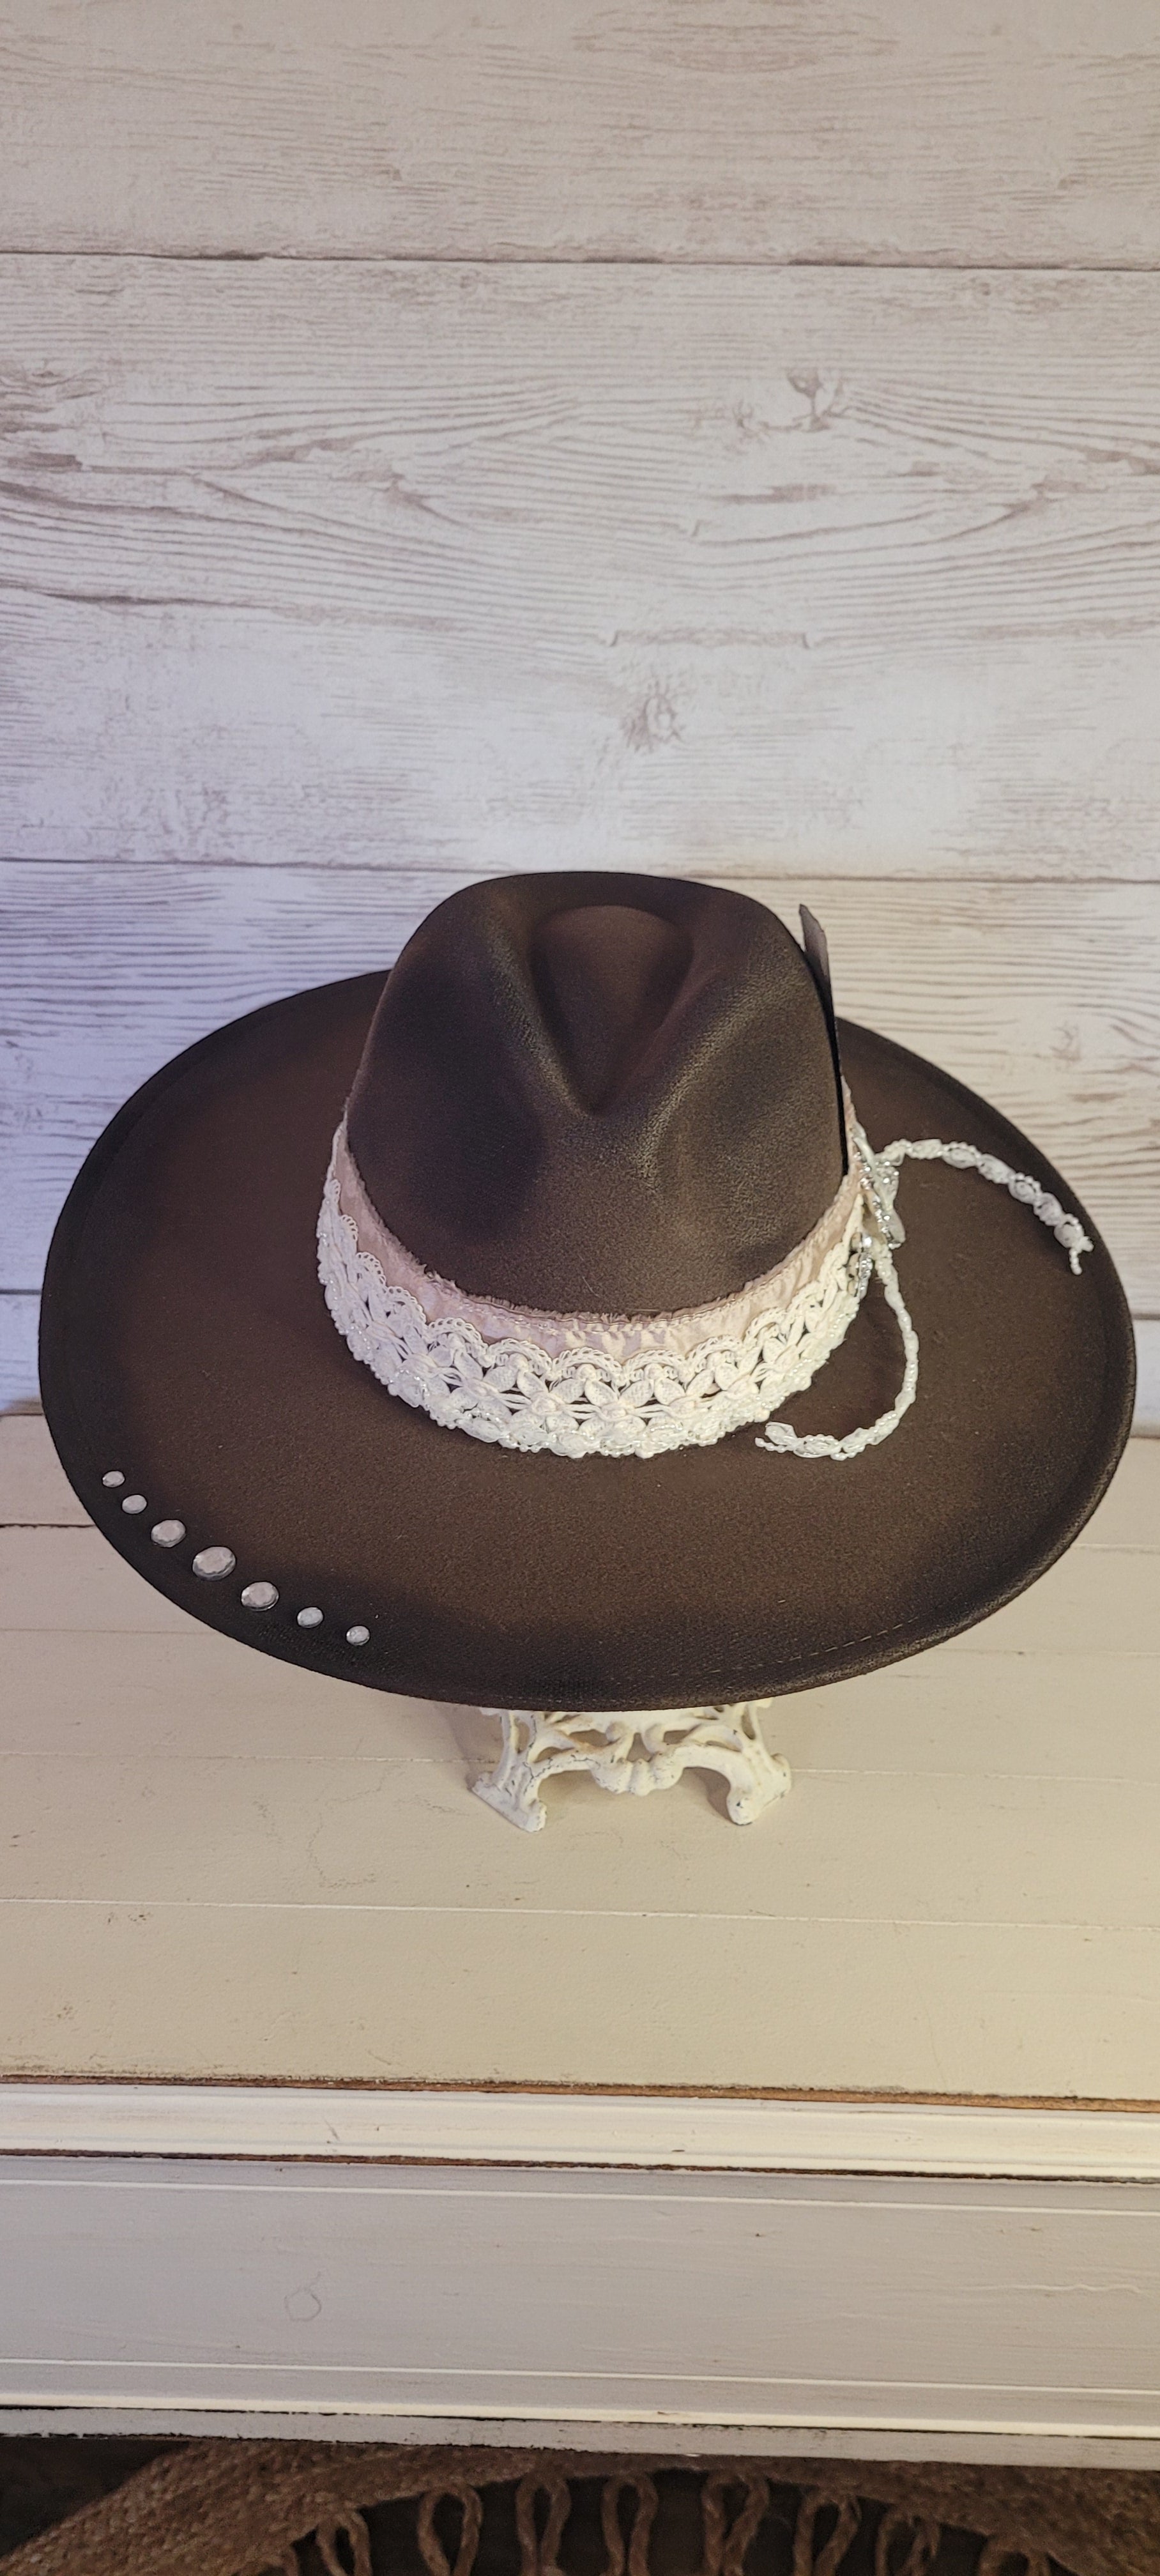 Features rhinestone details on brim, crystal brooches, & playing card, light rose ribbon, natural lace ribbon, pearl ribbon Felt hat Flat brim 65% polyester and 35% cotton Ribbon drawstring for hat size adjustment Head Circumference: 24" Crown Height: 5" Brim Length: 15.75" Brim Width: 14.5" Branded & numbered inside crown Custom designed by Kayla